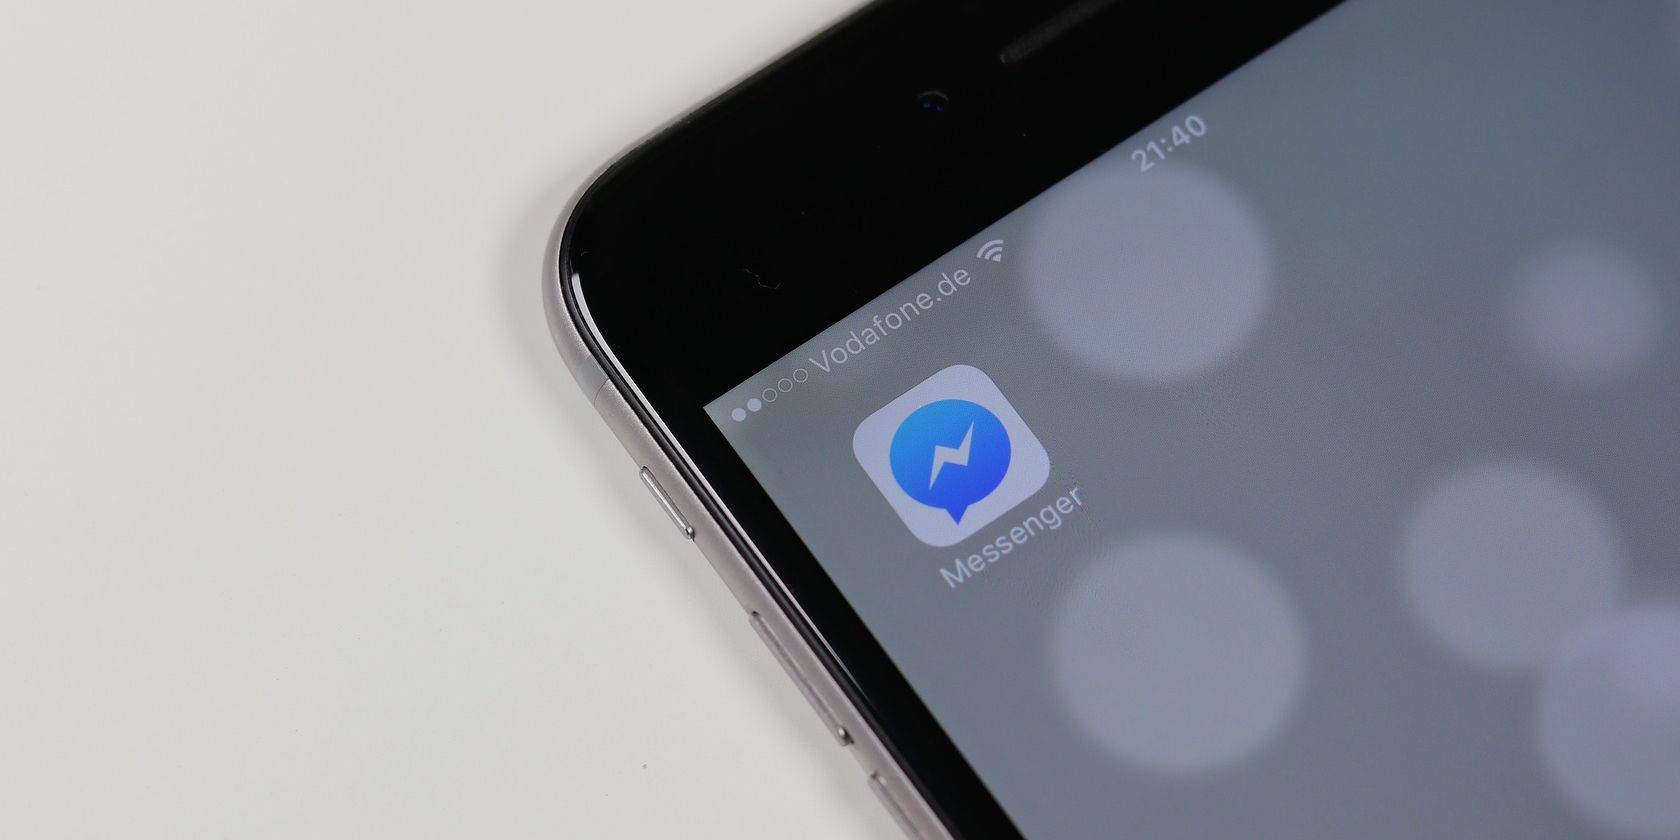 Photo of the Facebook Messenger logo on an iPhone